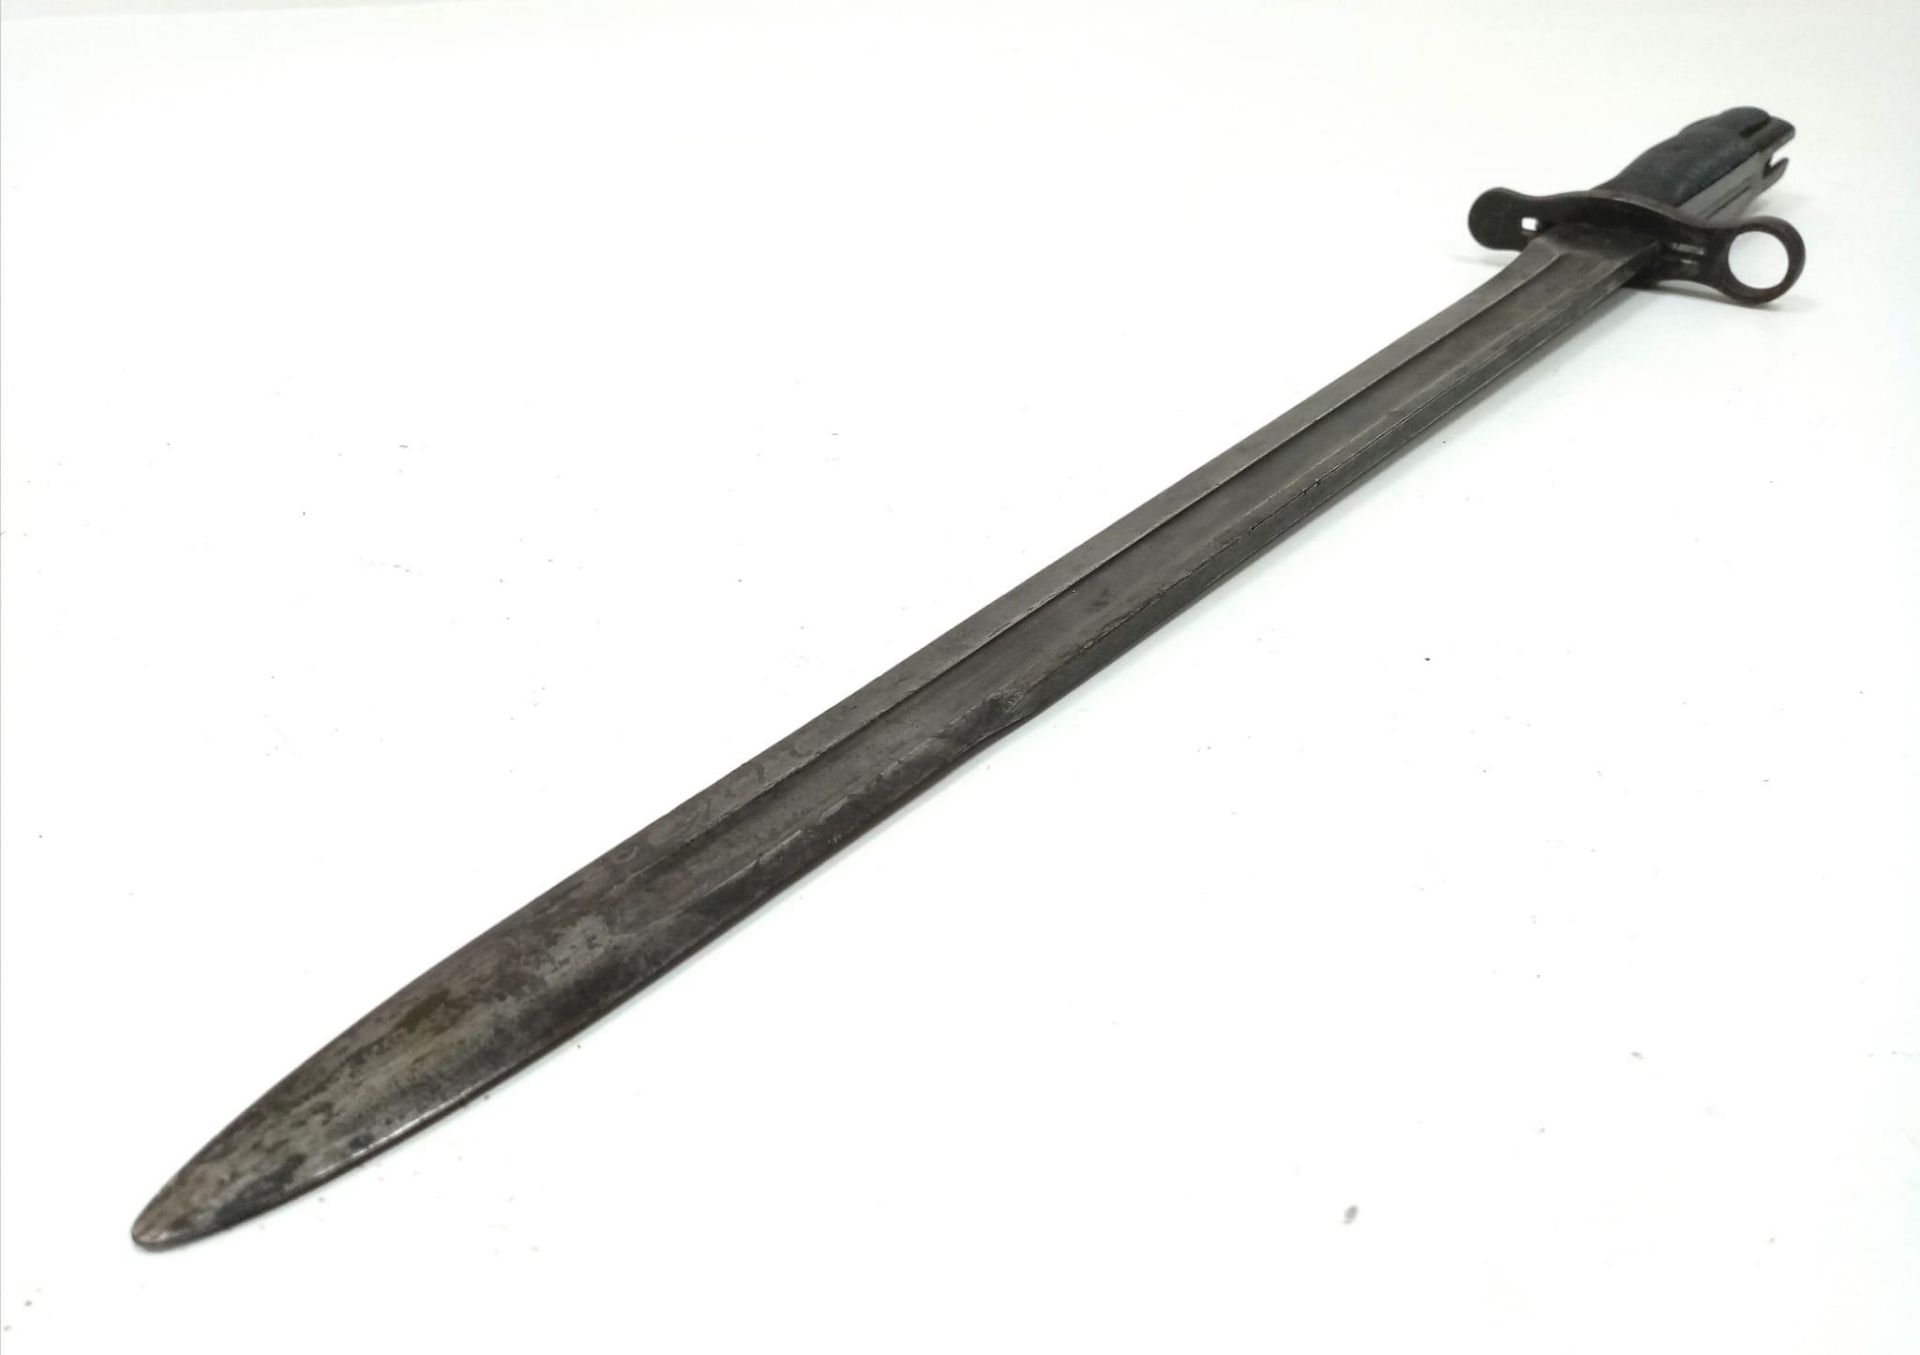 US Springfield Rock Island Arsenal M1905 16” Bayonet Dated 1906 re-issued in 1942 for the Garand - Image 6 of 15